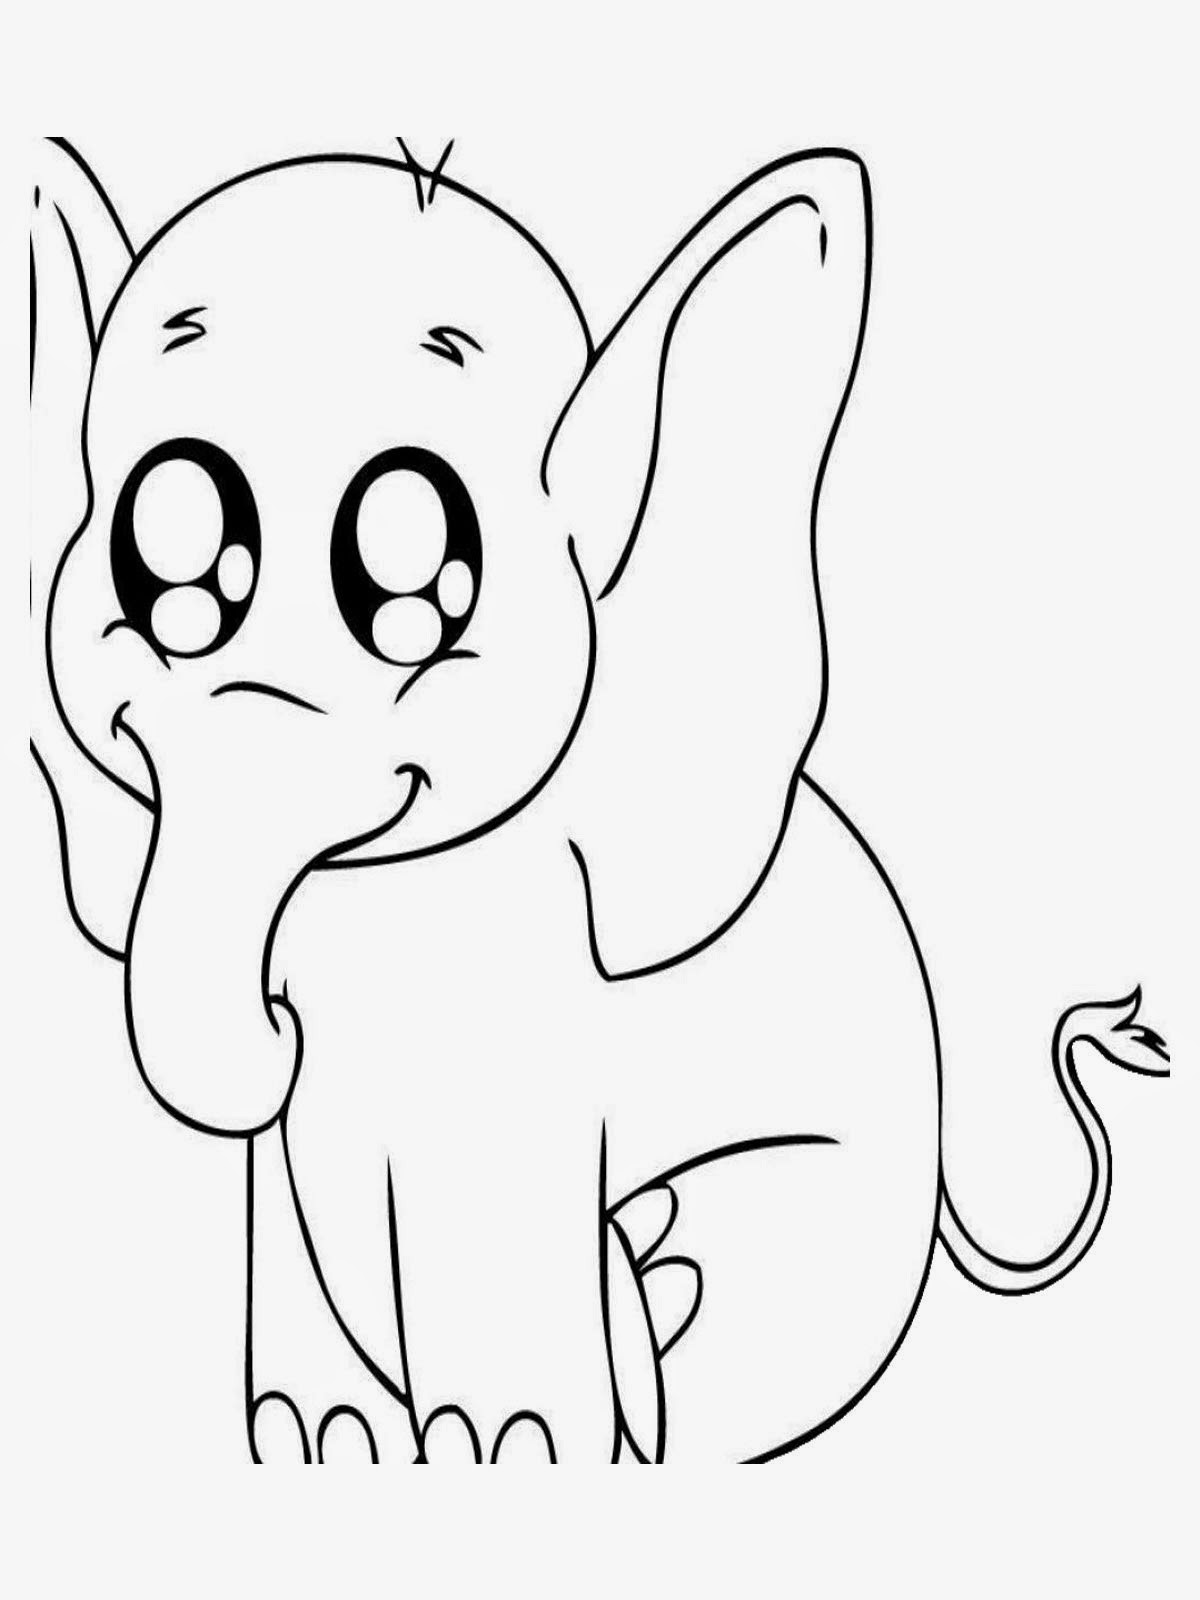 Cut Coloring Pages
 Coloring Pages Cute and Easy Coloring Pages Free and